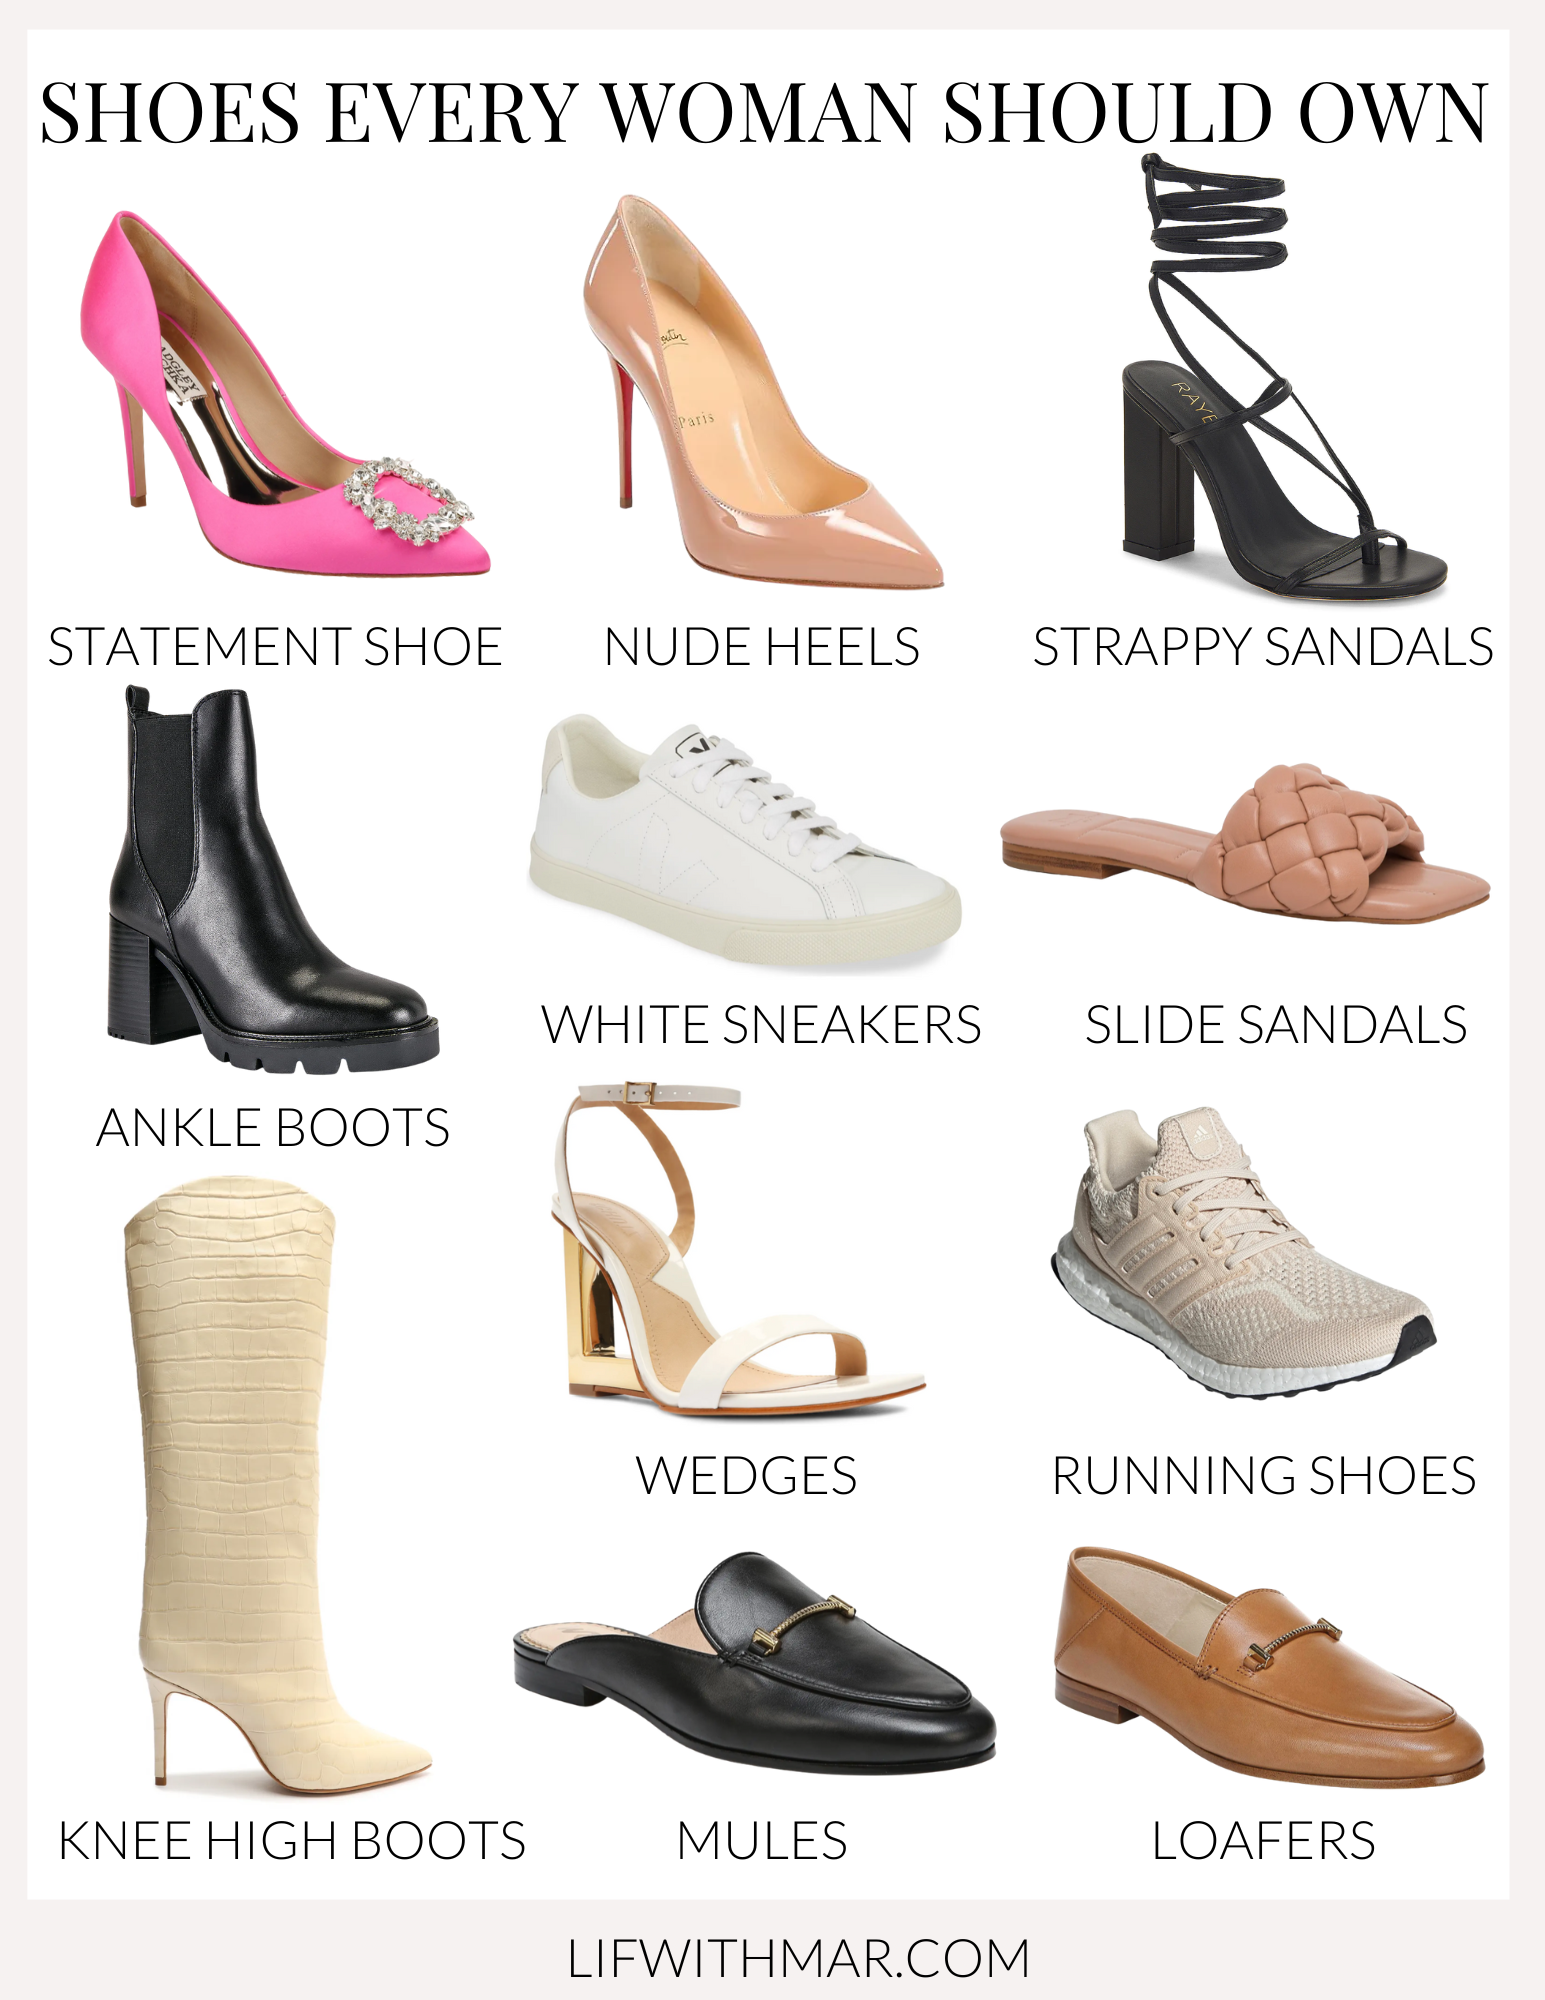 10 Shoes Every Woman Should Own